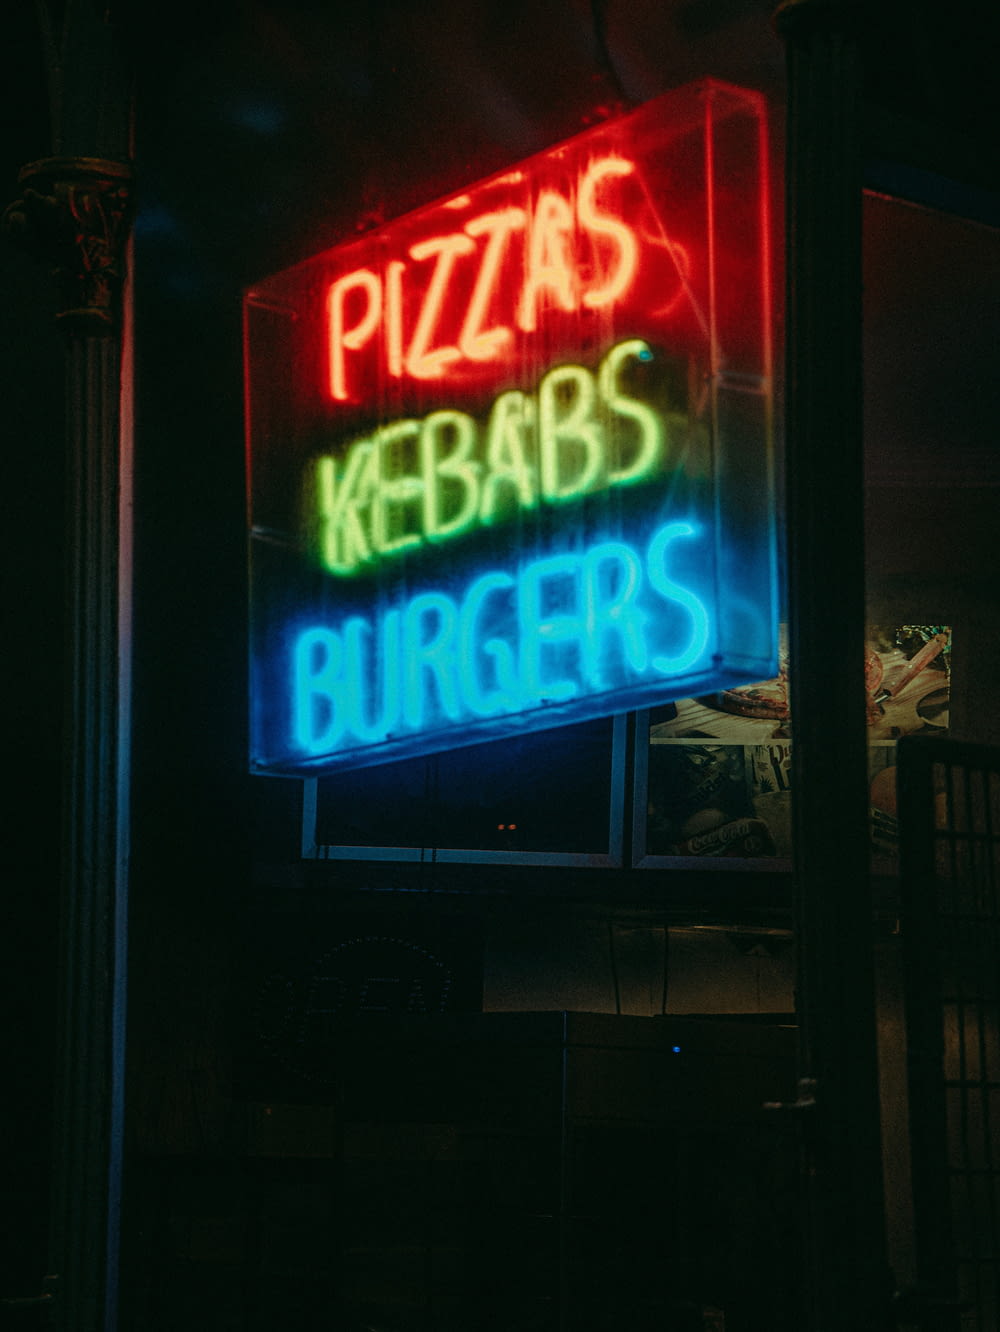 a neon sign that says pizzas, kebabs, burgers